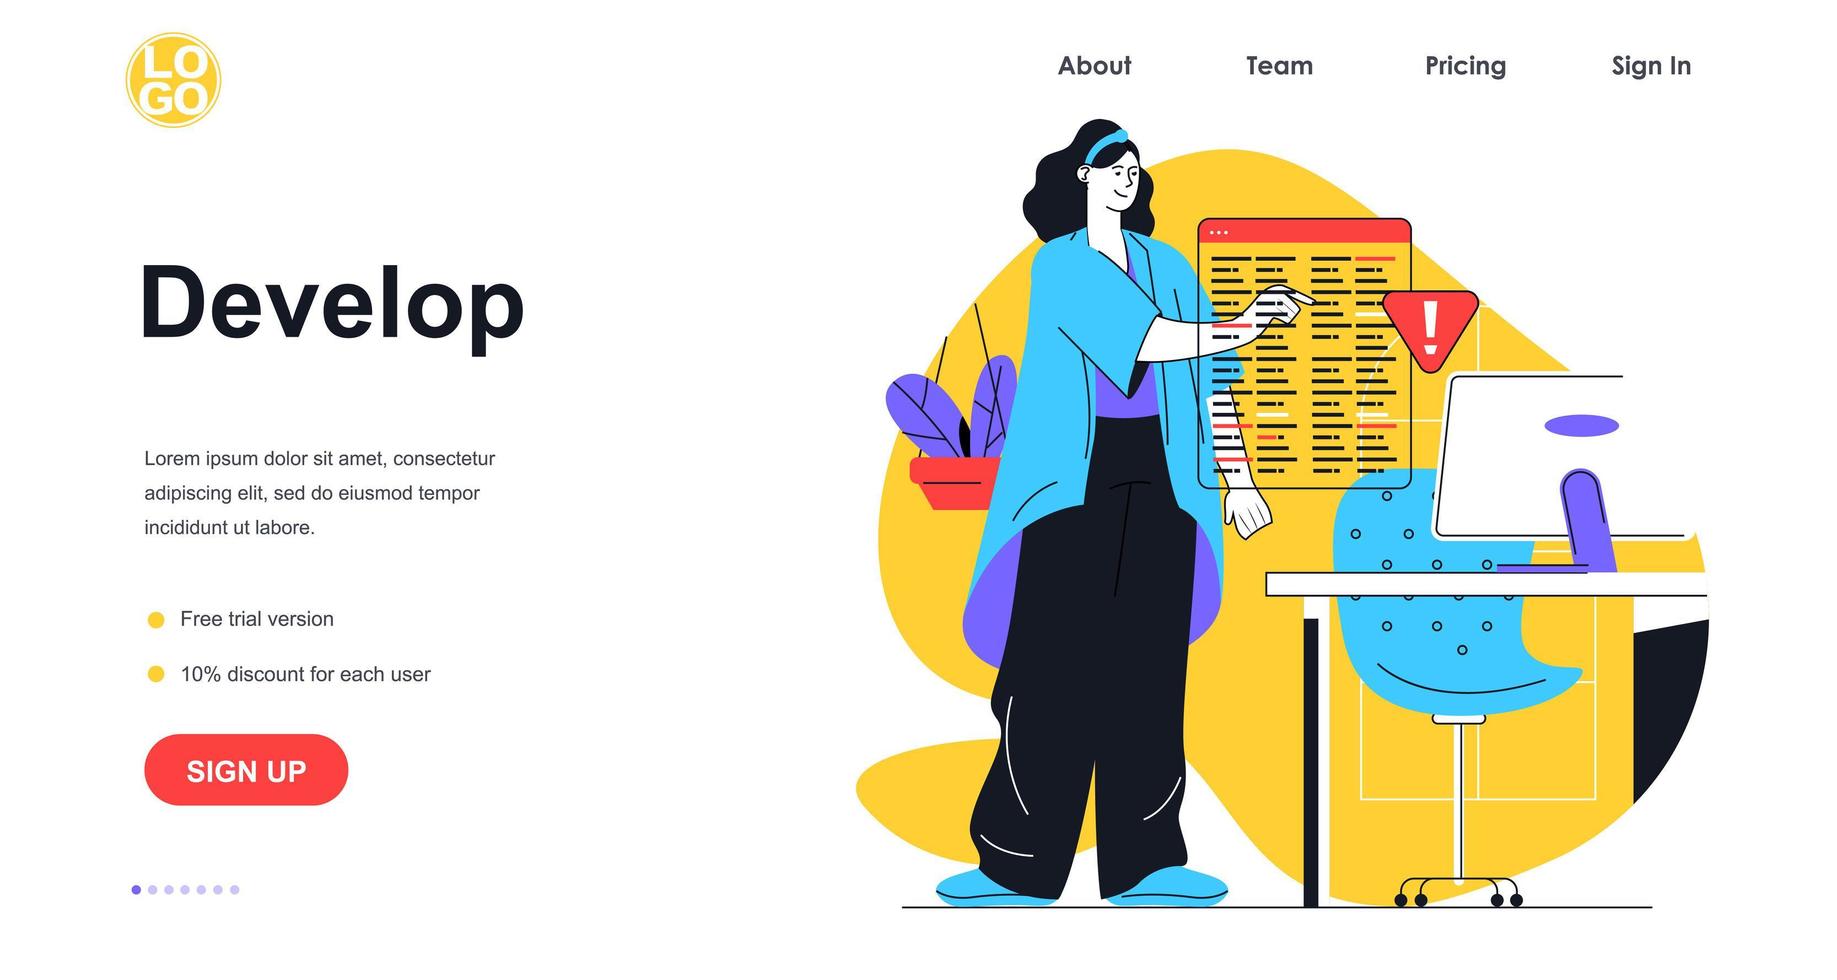 Develop software web banner concept. Woman programmer programming and coding website or application, working at computer, landing page template. Vector illustration with people scene in flat design